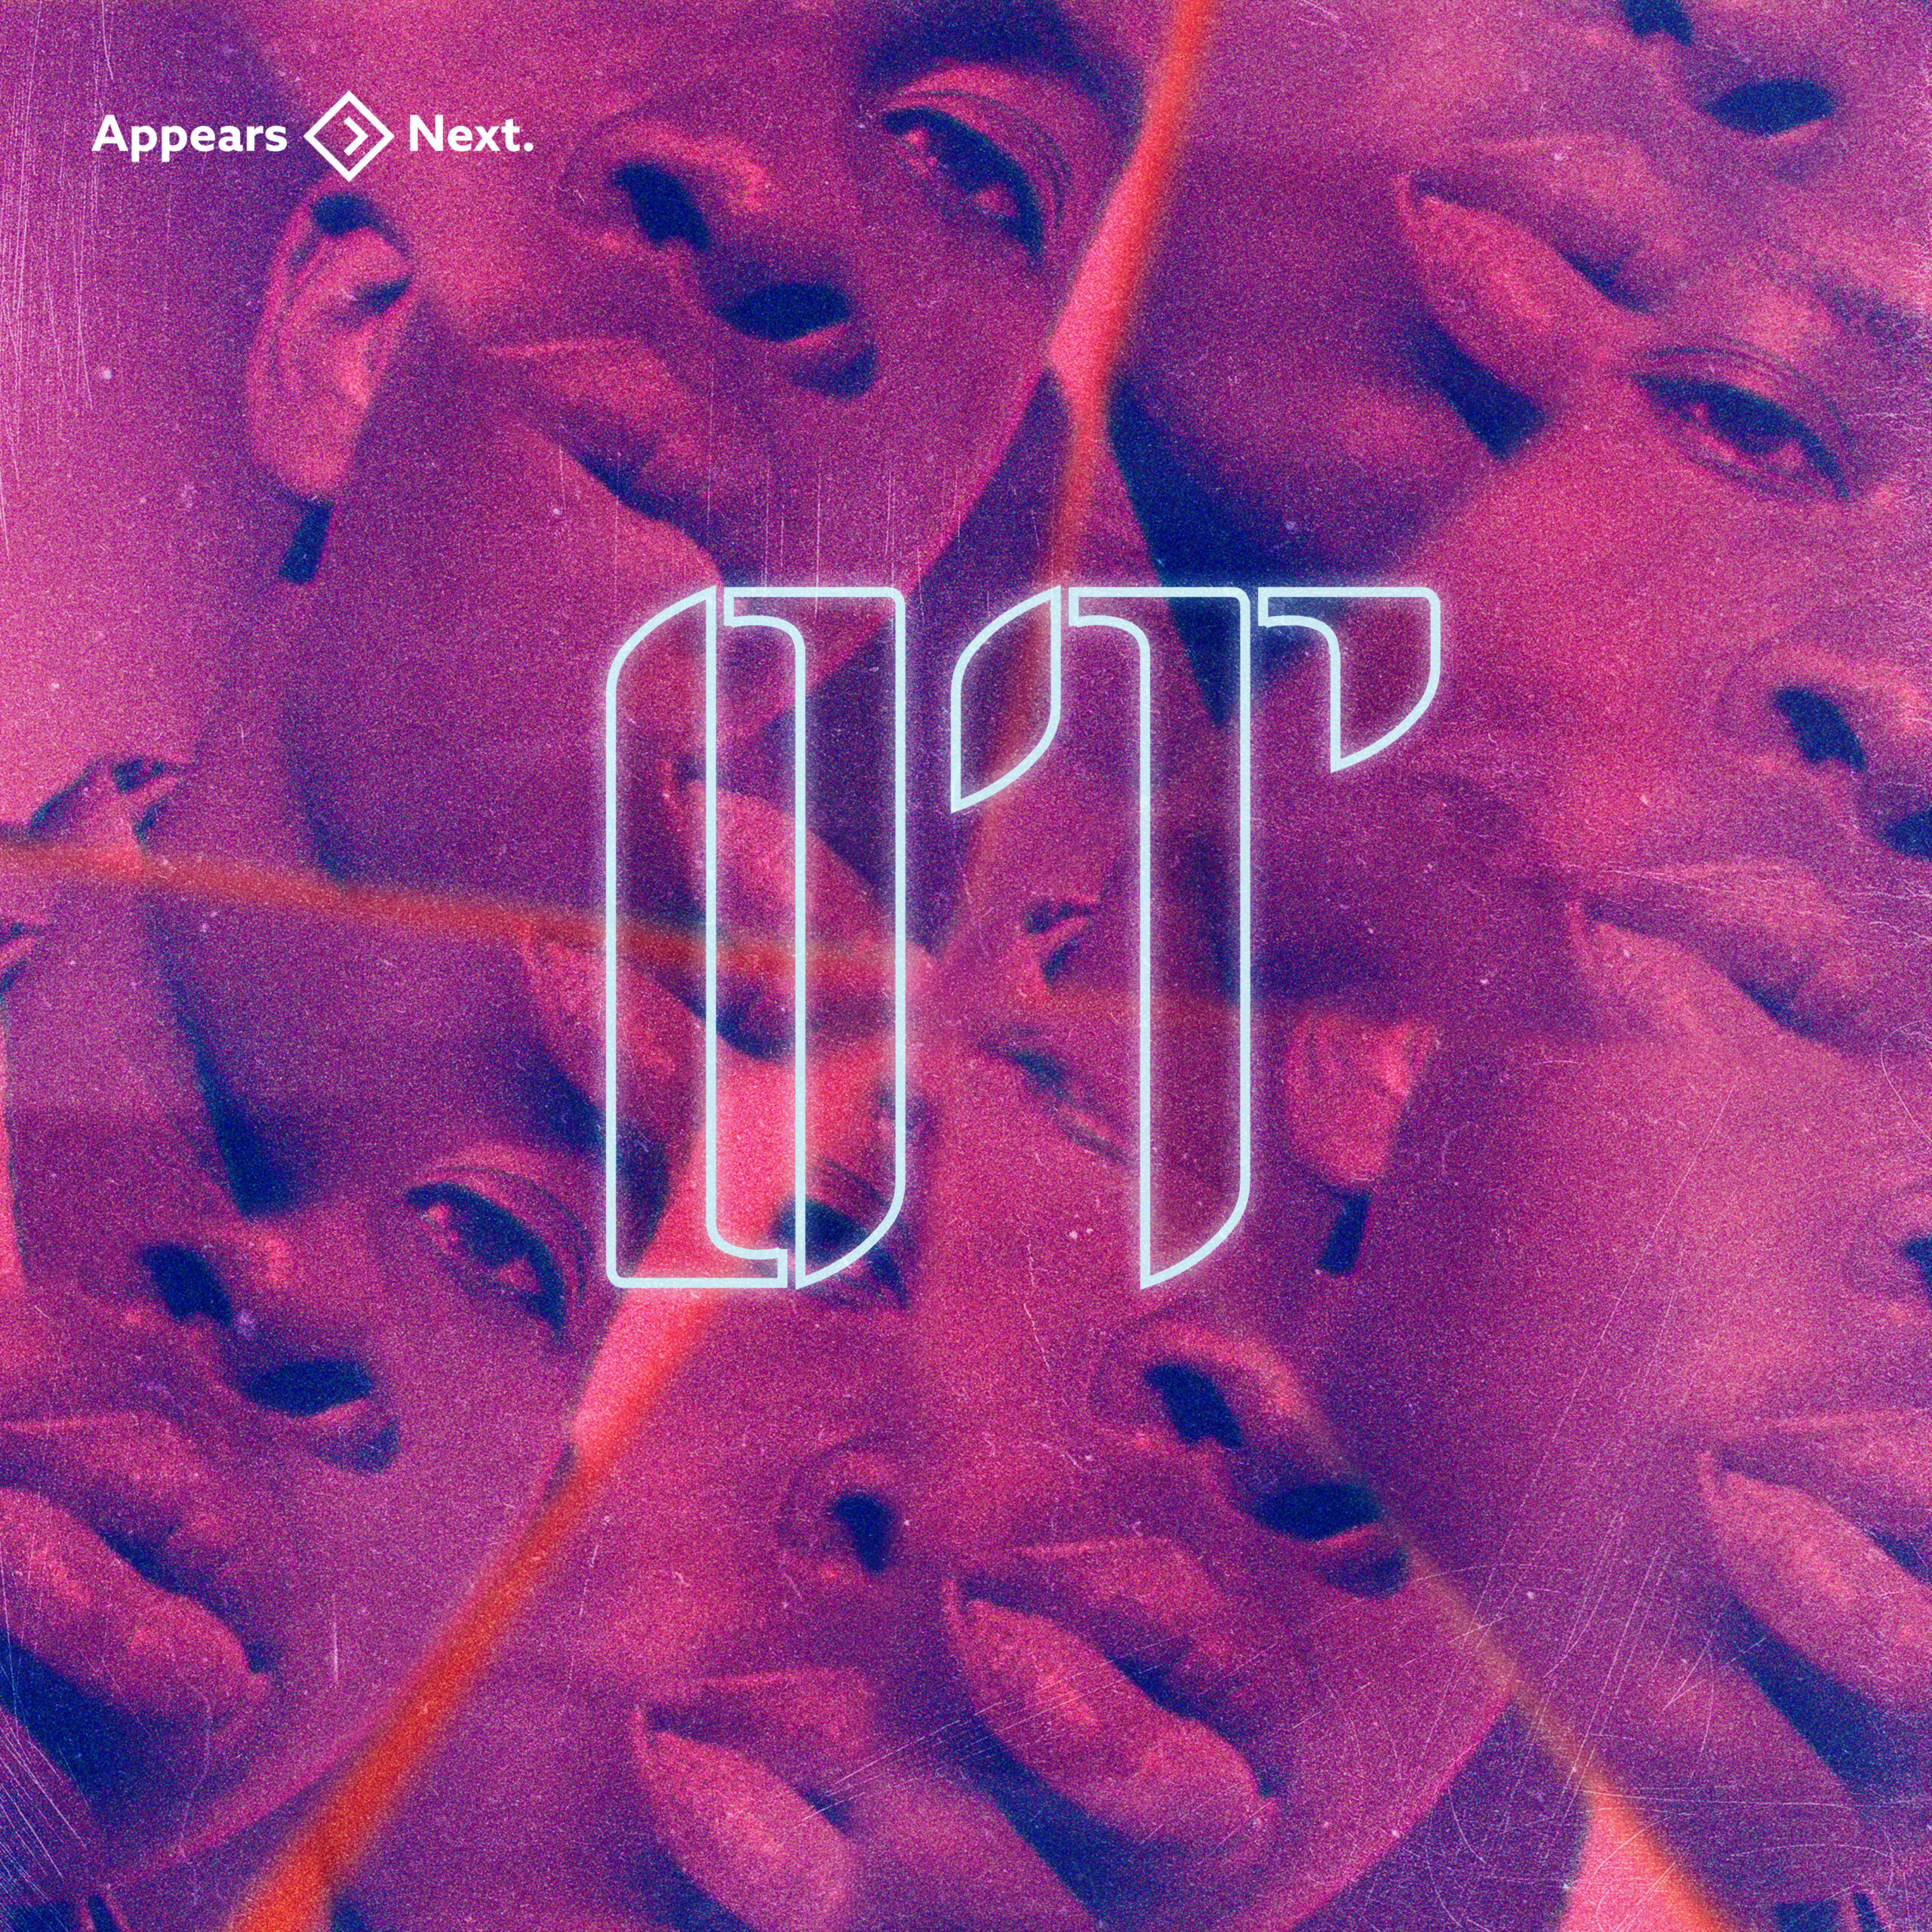 AppearsNext_ExpandSeries_OT_EP_Cover_02-copy